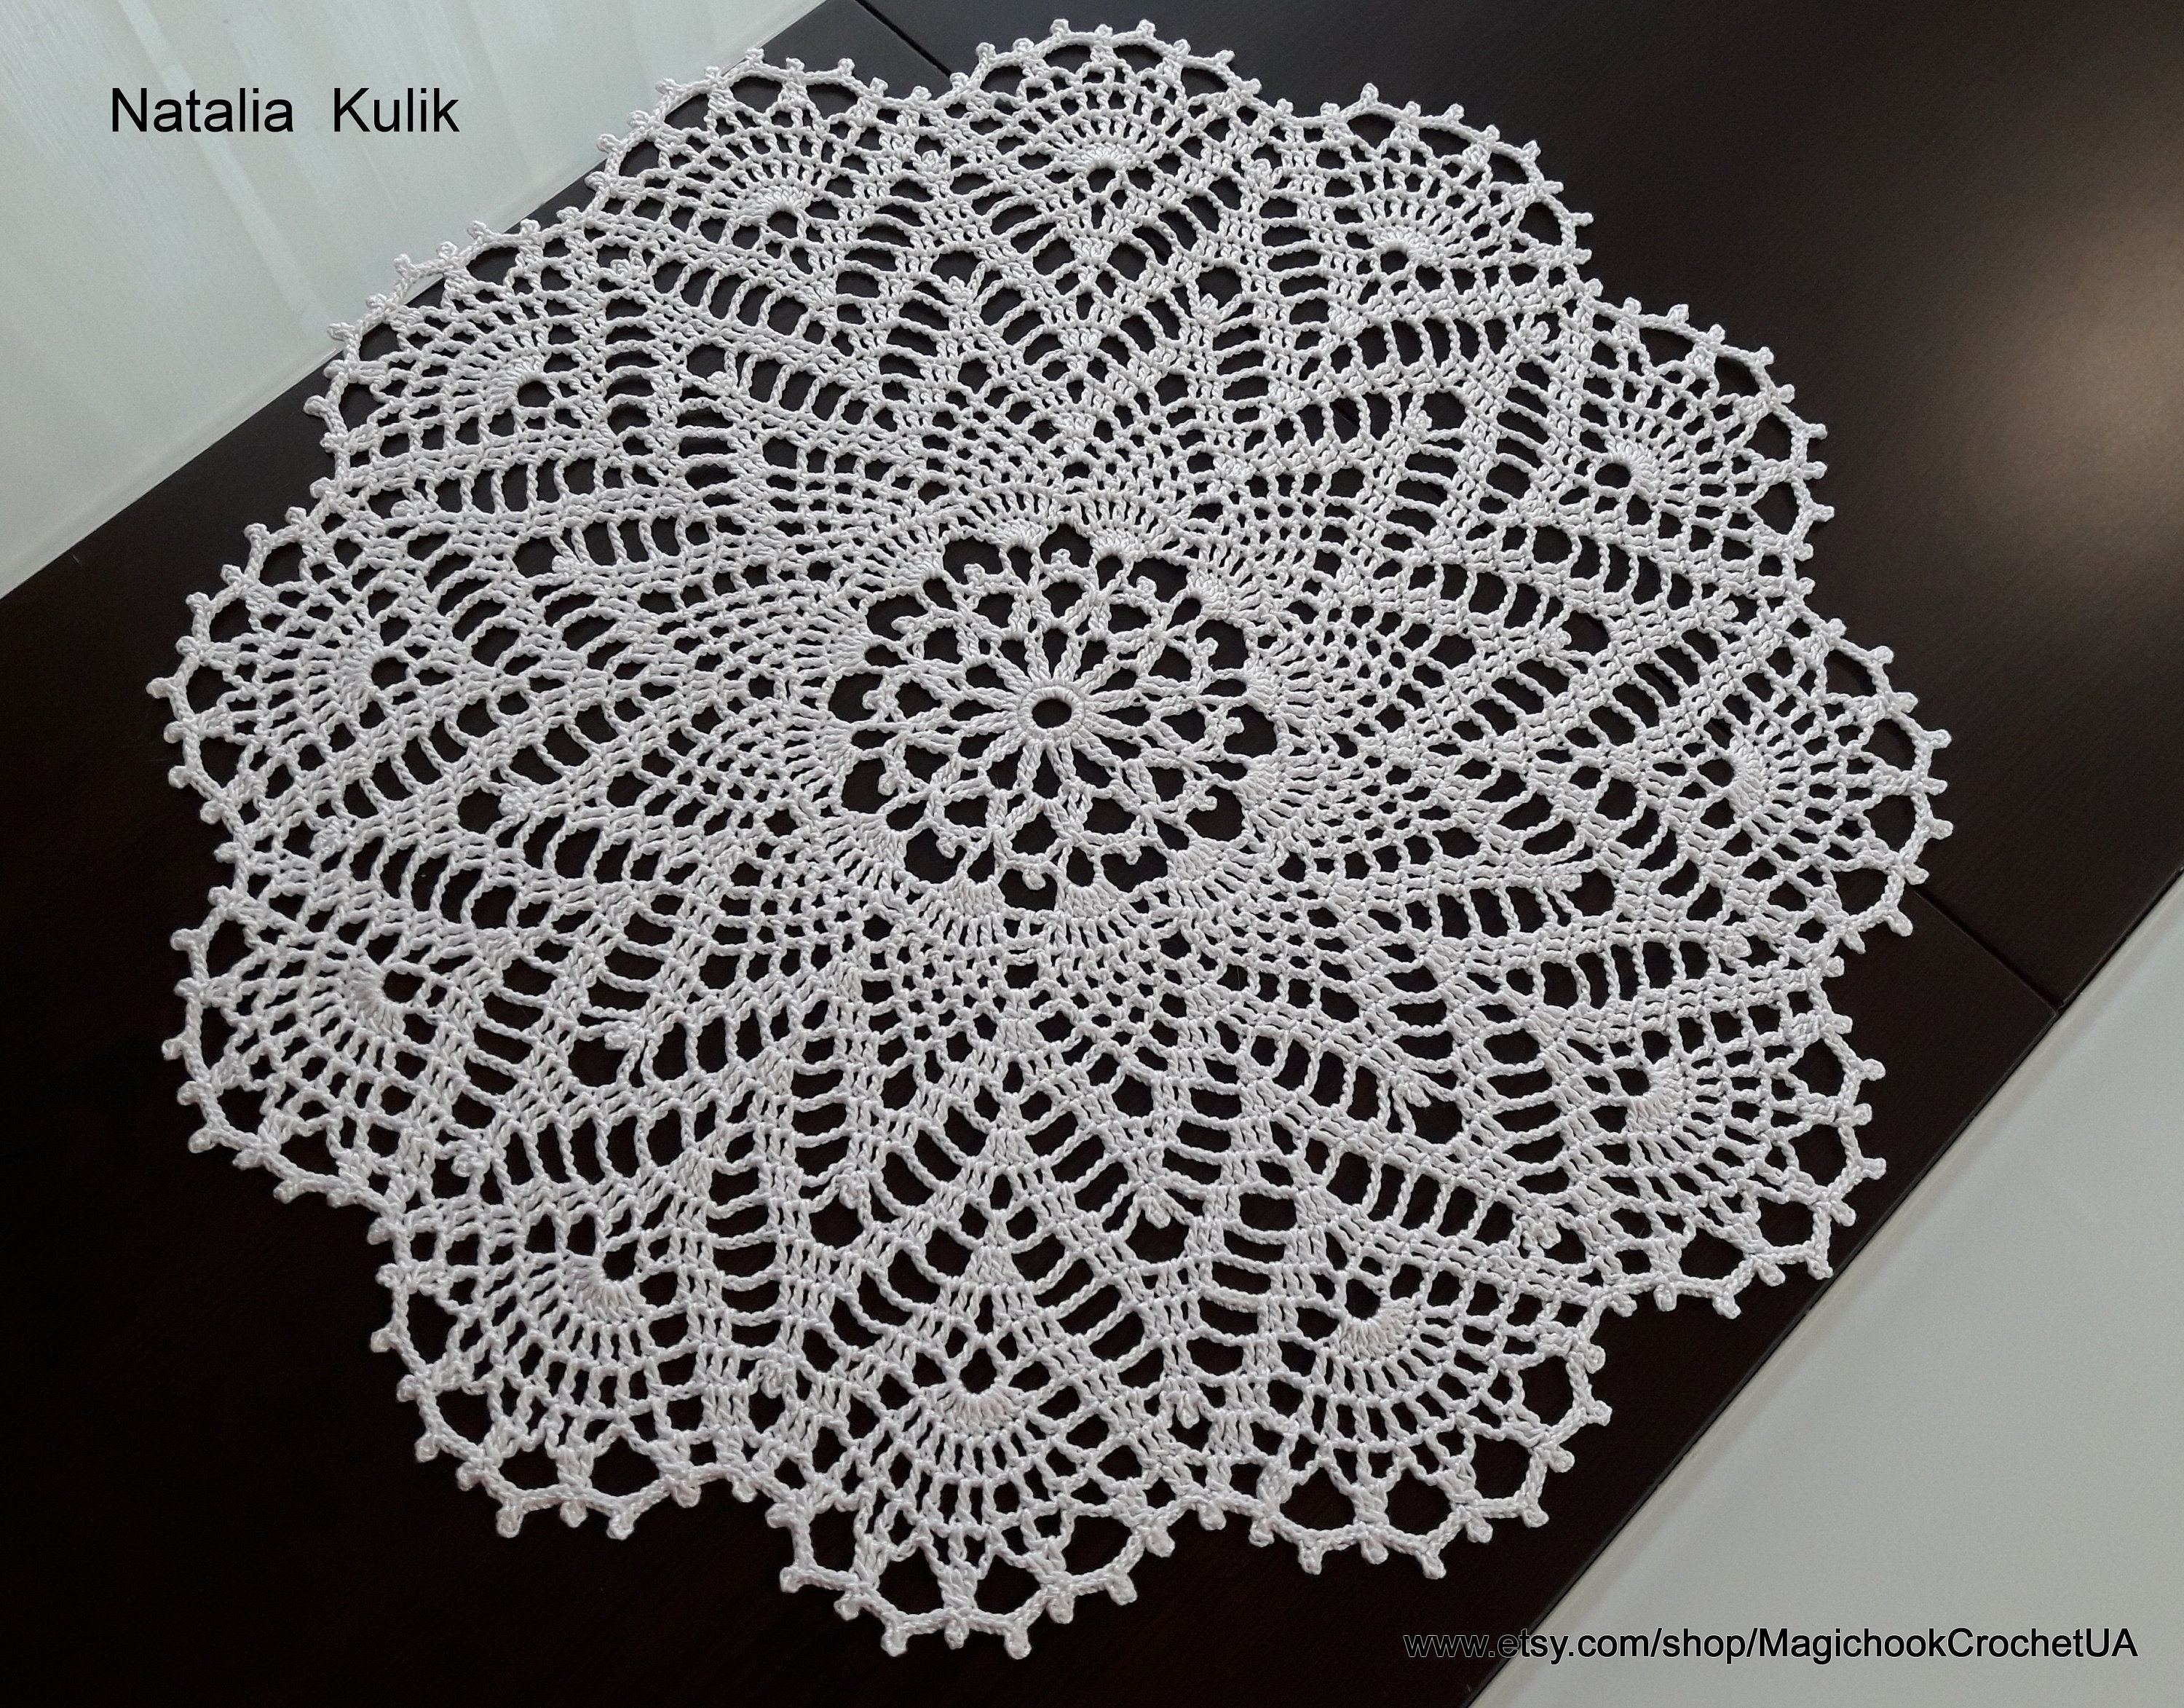 crocheted doily pink Round lace READY TO SHIP centerpiece decor 15 inches